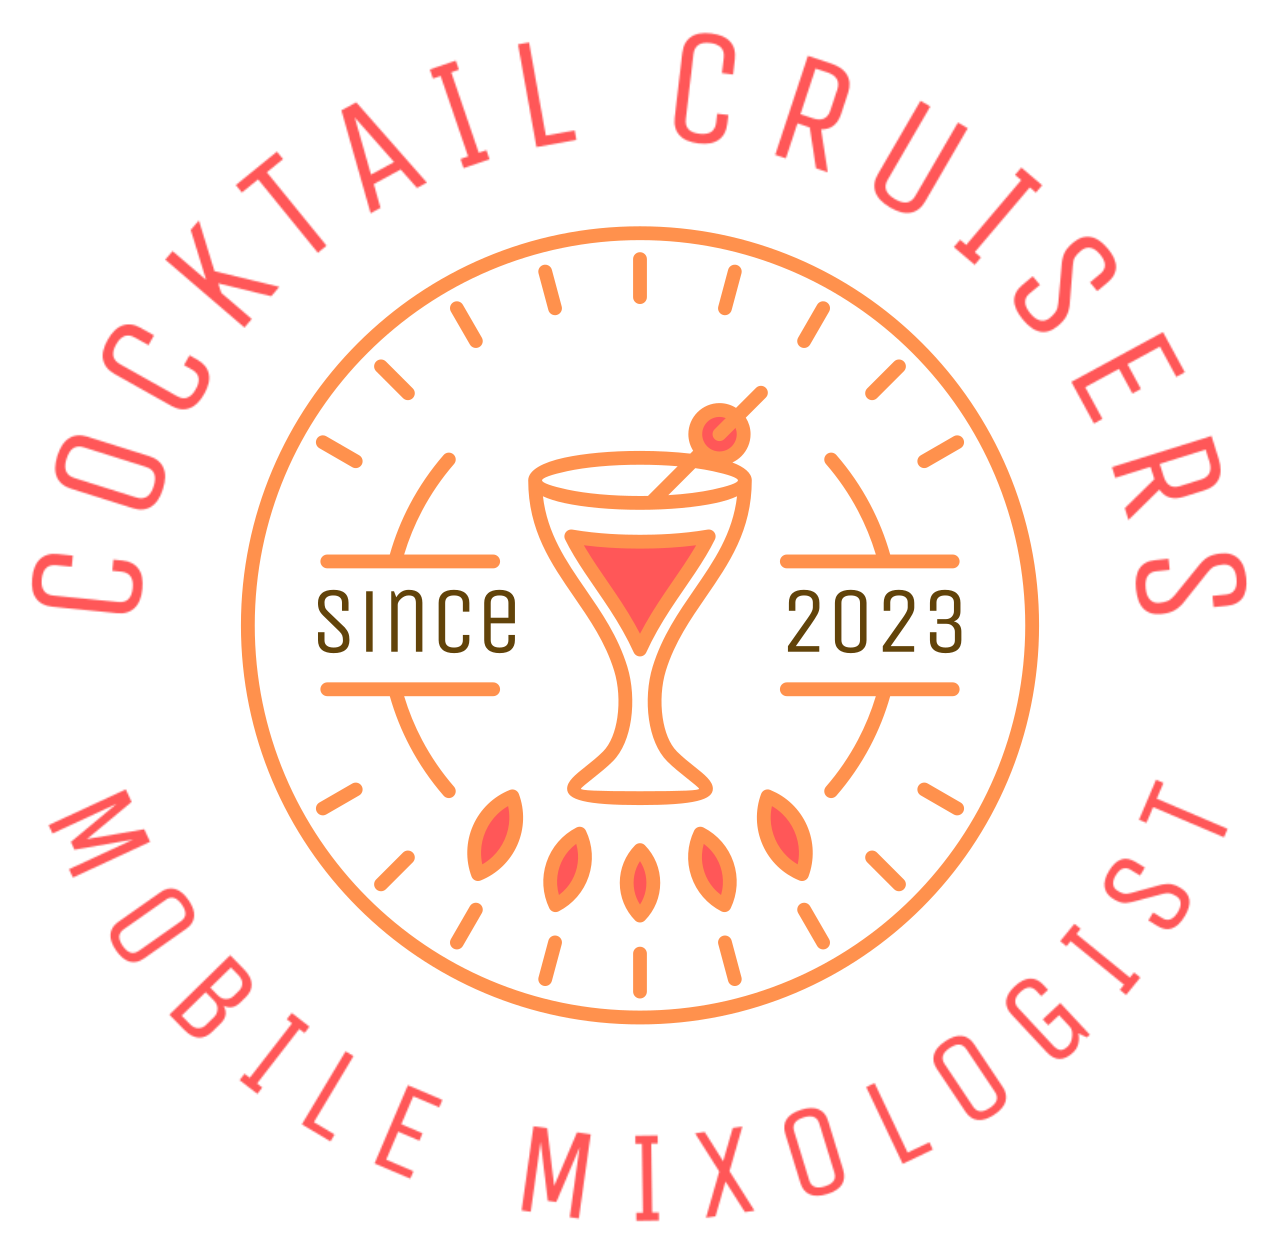 COCKTAIL CRUISERS's logo